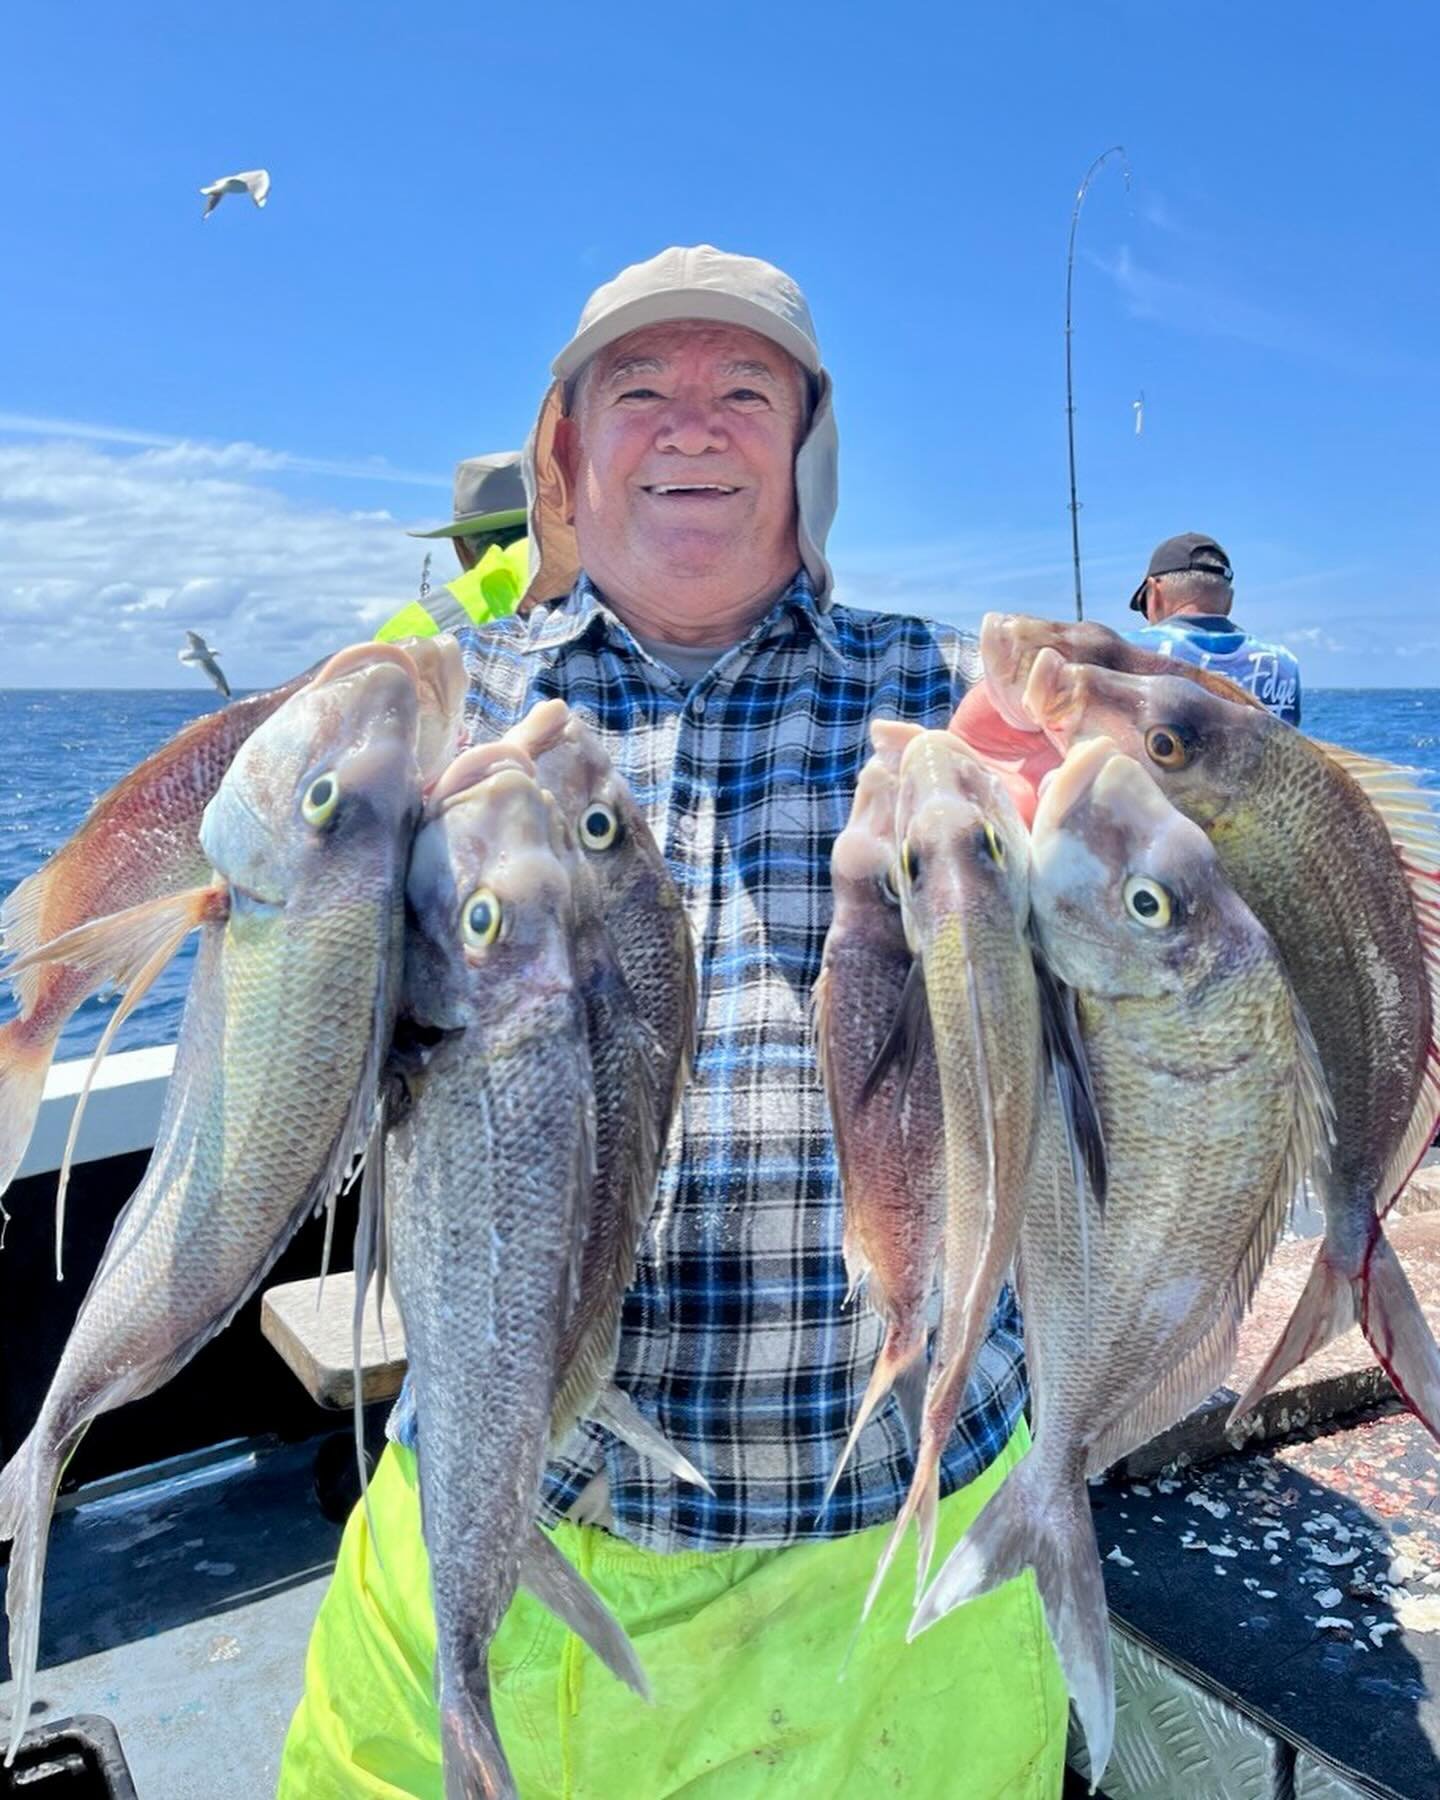 Meet the fishing maestros from Fairfield Fishing Club, showcasing their epic hauls from last weekend&rsquo;s charter! 🤩 They make it look so easy! 🎣